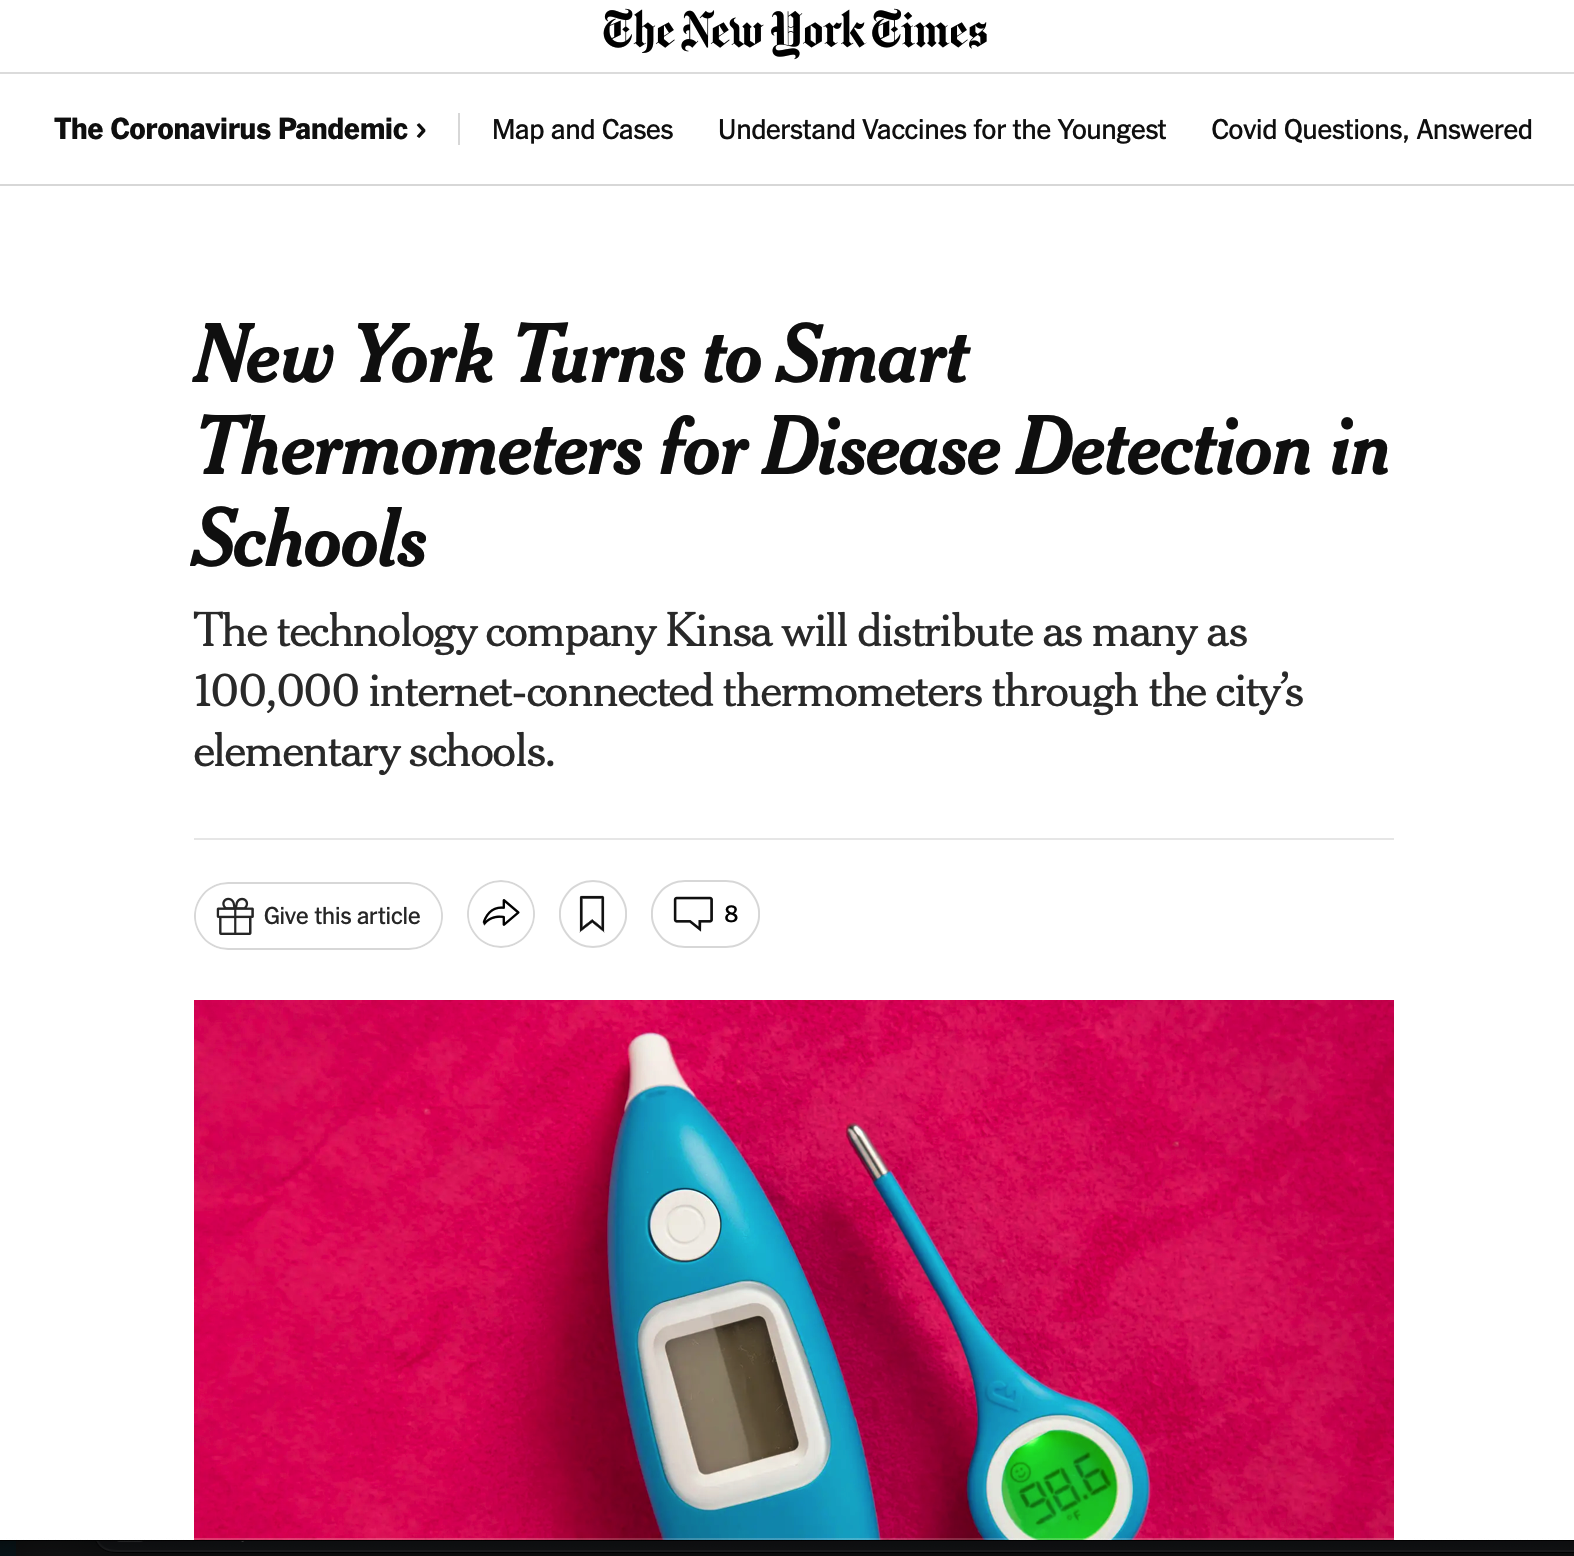 New York Turns to Smart Thermometers for Disease Detection in Schools